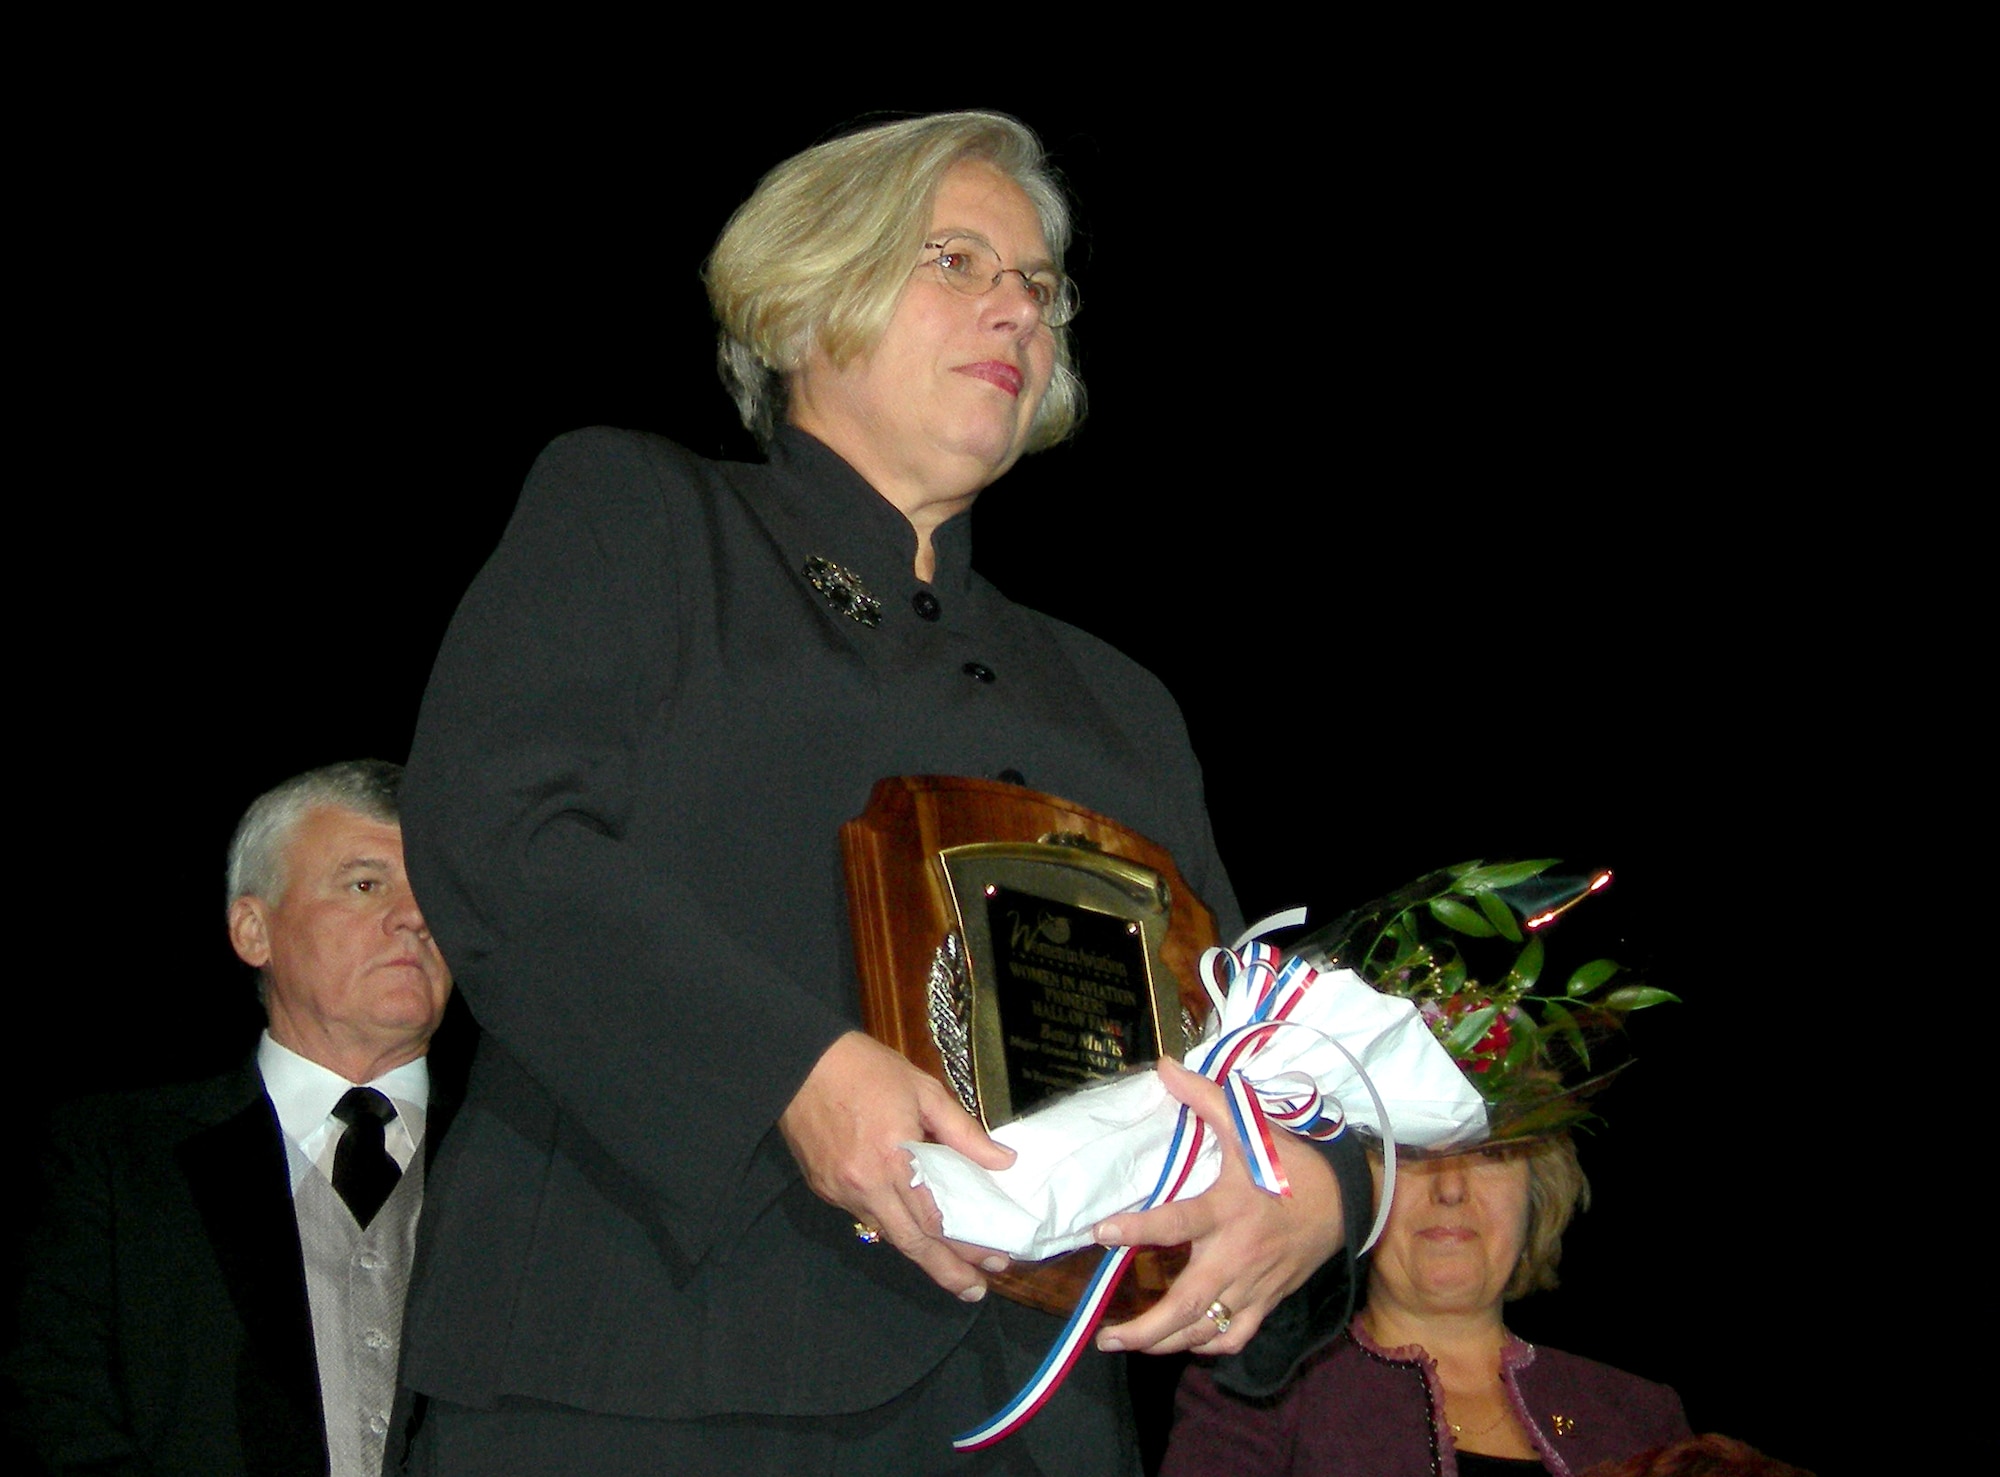 Retired Air Force Reserve Maj. Gen. Betty Mullis is inducted into the Pioneer Hall of Fame for Women in Aviation, International, in Nashville, Tenn., Saturday, March 25, 2006. (U.S. Air Force photo/Annette Crawford)